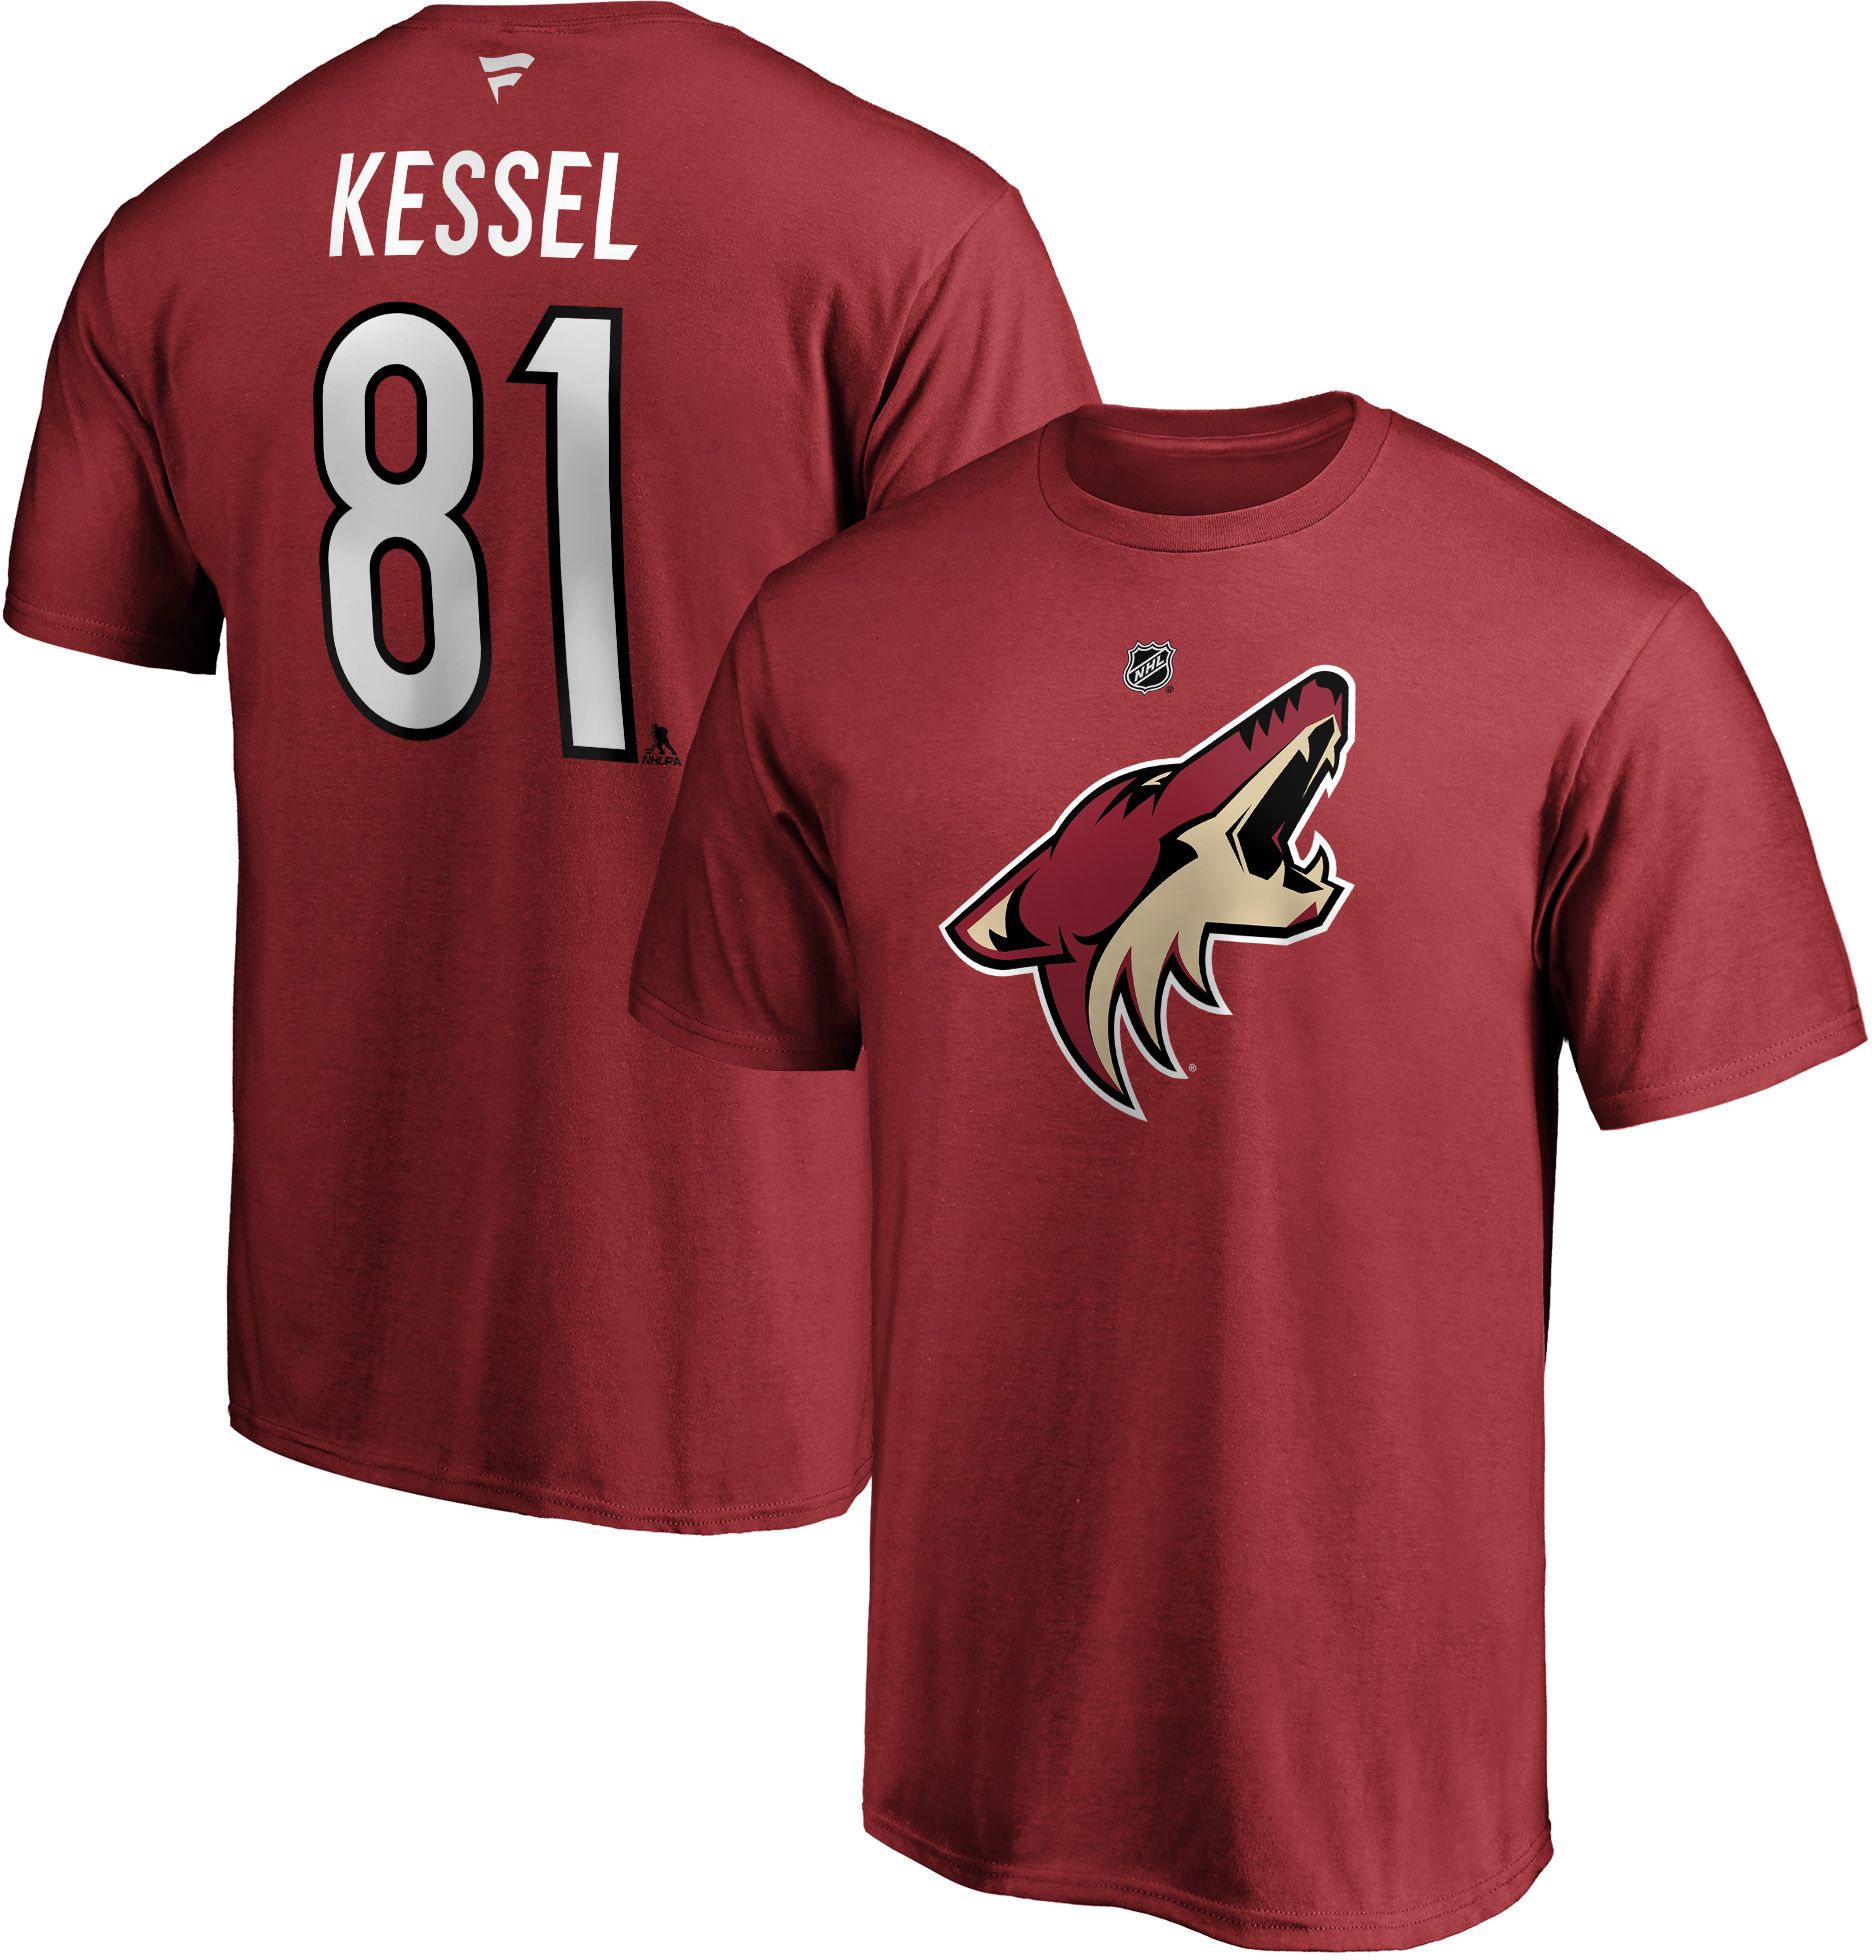 Phil Kessel #81 Red Player T-Shirt 